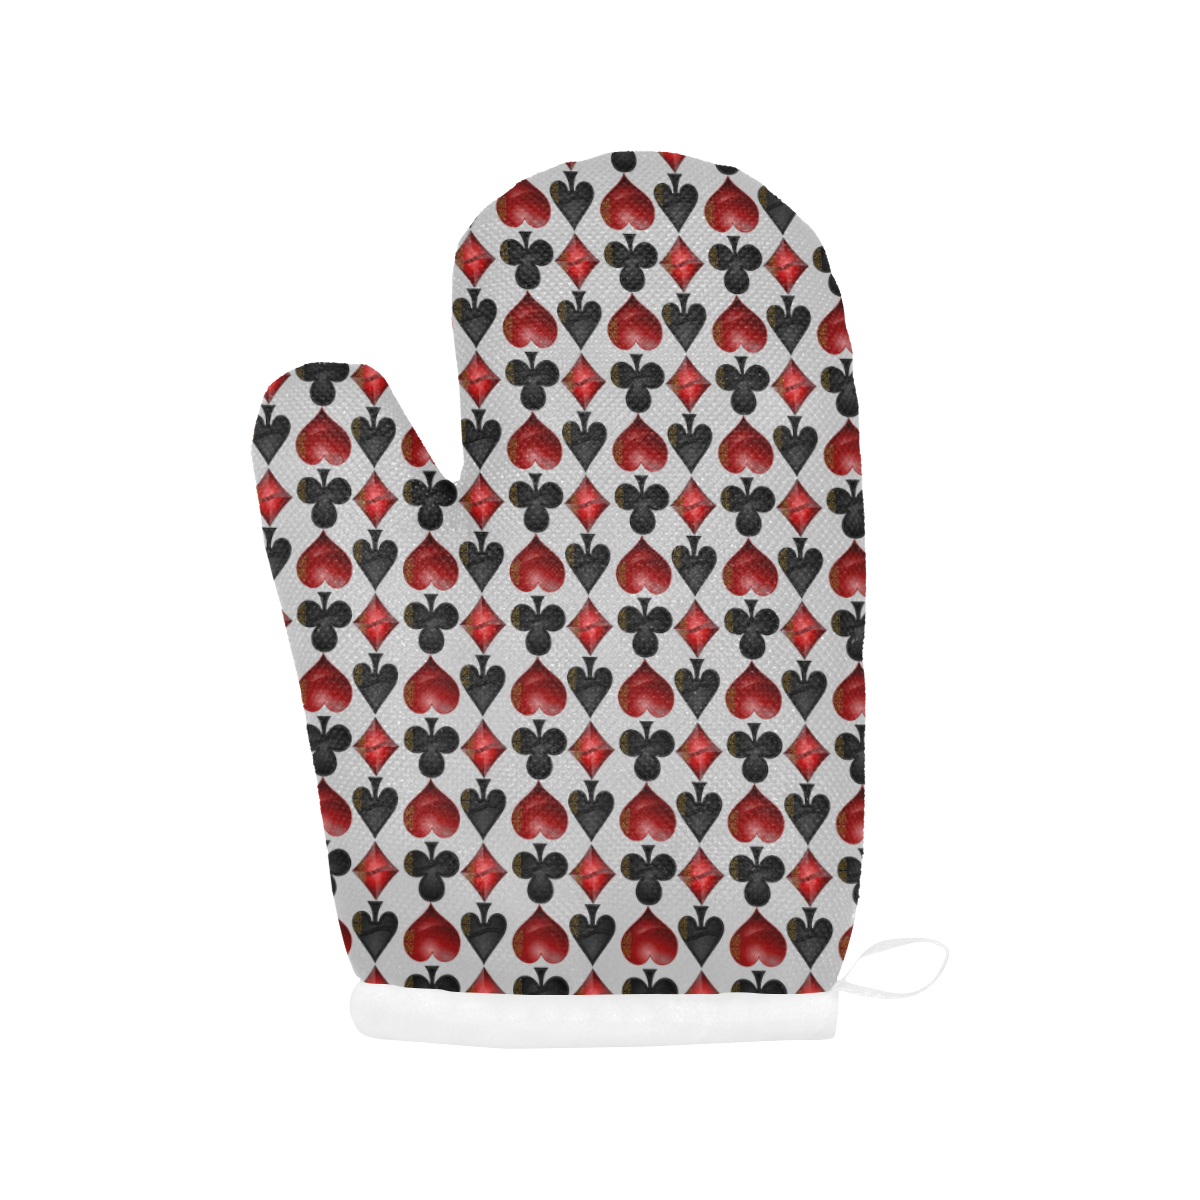 Las Vegas Black and Red Casino Poker Card Shapes on Silver Oven Mitt (Two Pieces)